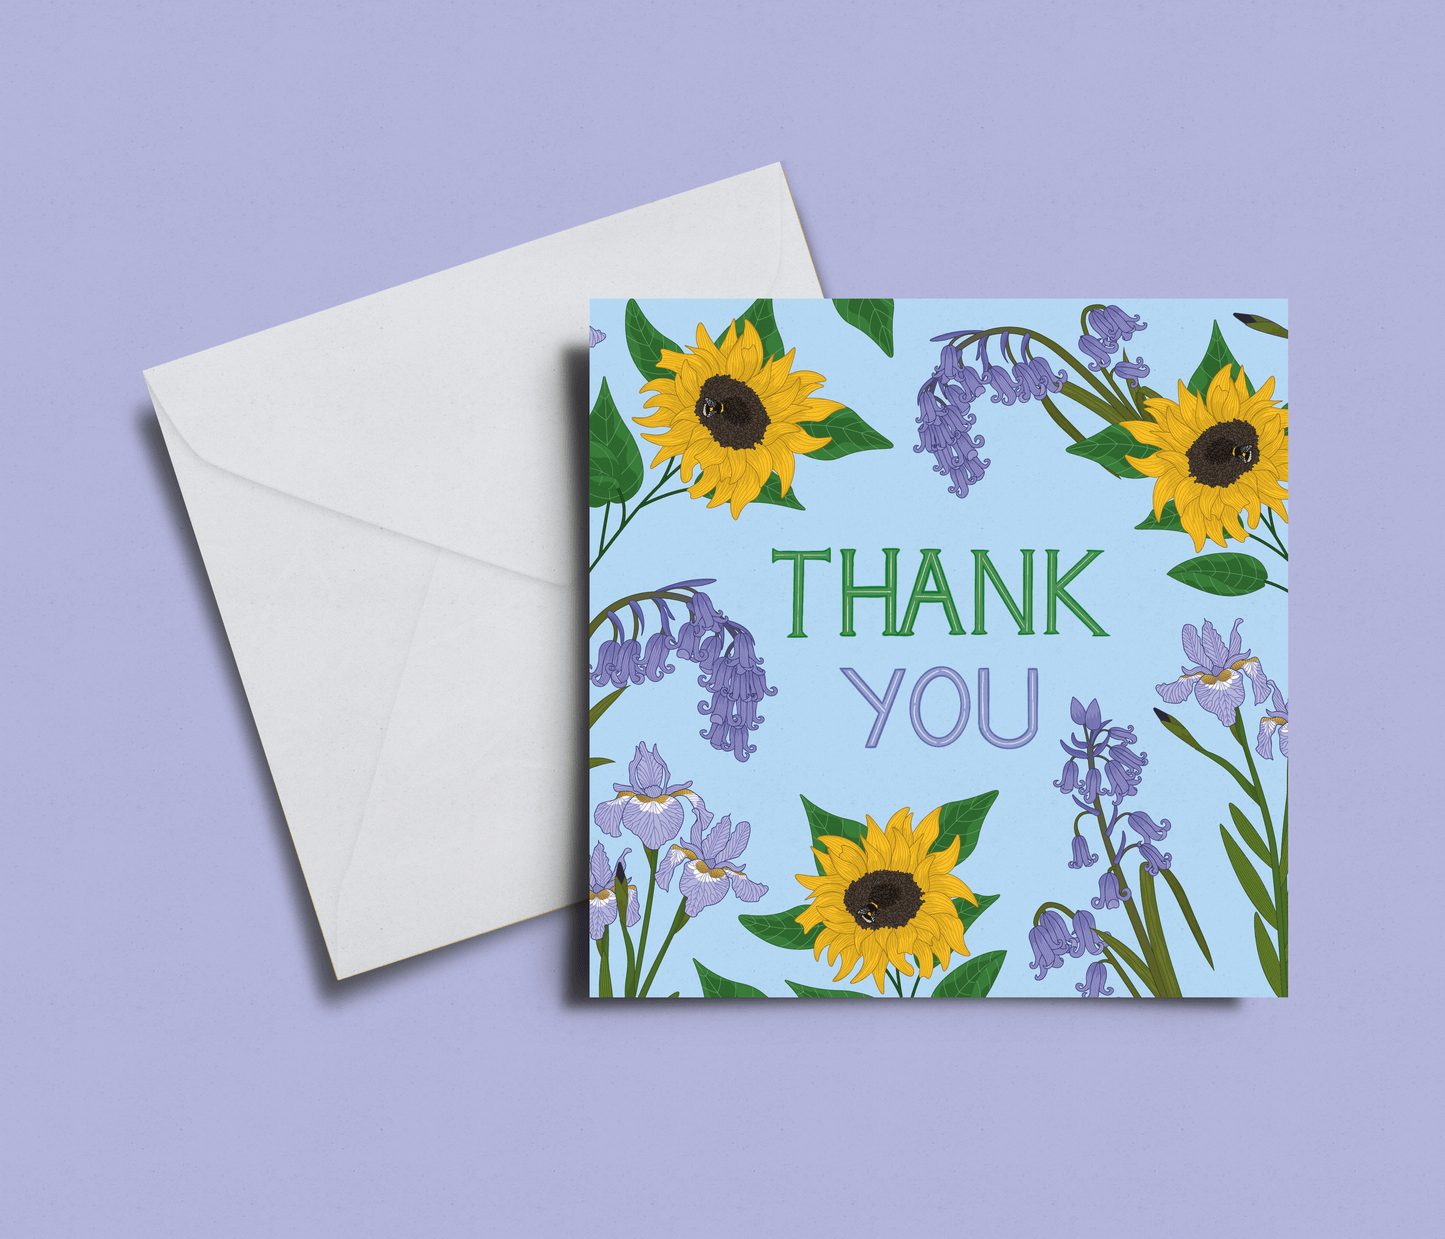 'Thank You' Sunflowers Card